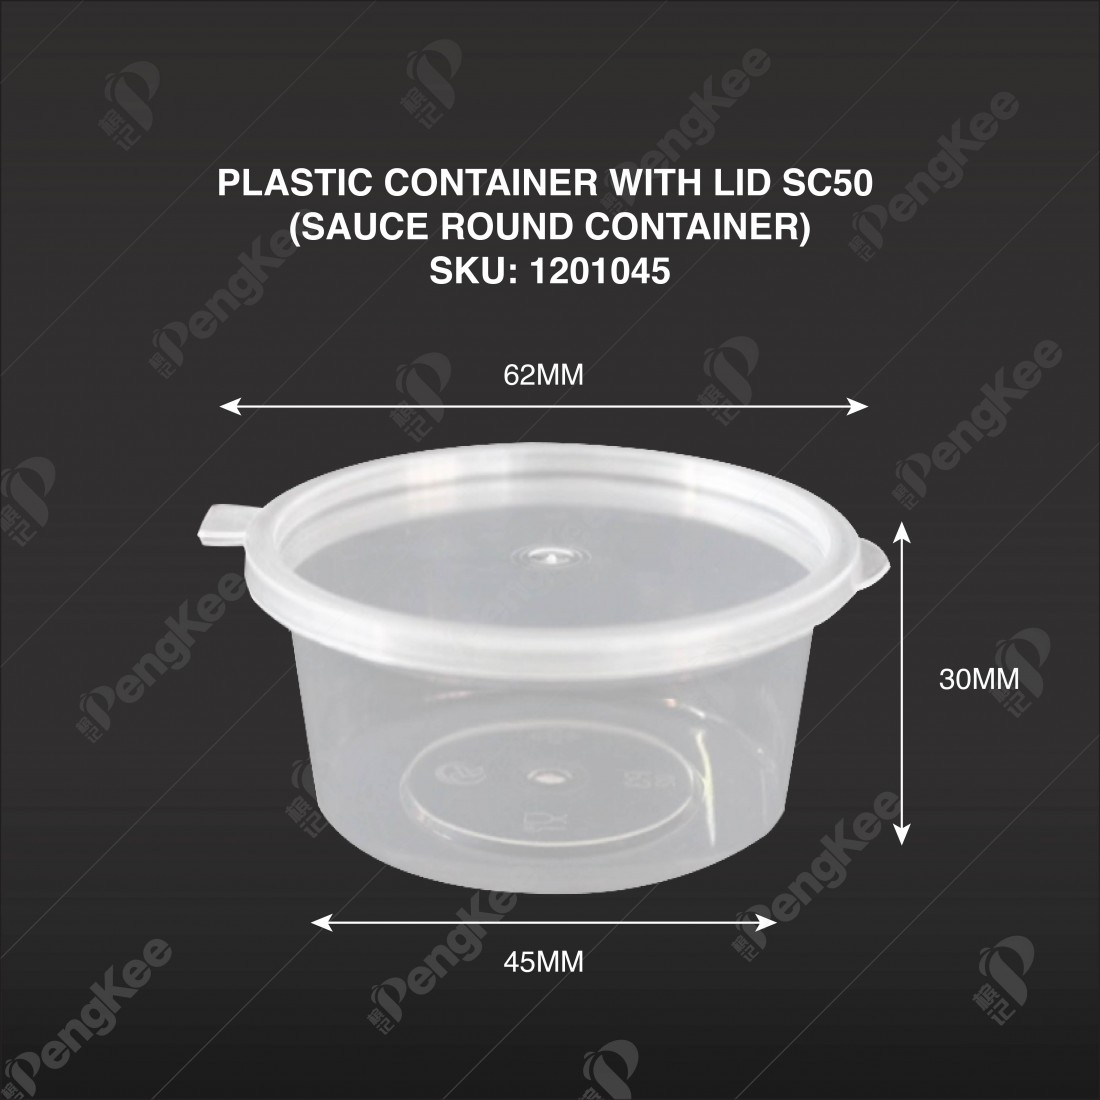 PLASTIC CONTAINER WITH LID SC50 (SAUCE ROUND CONTAINER) 